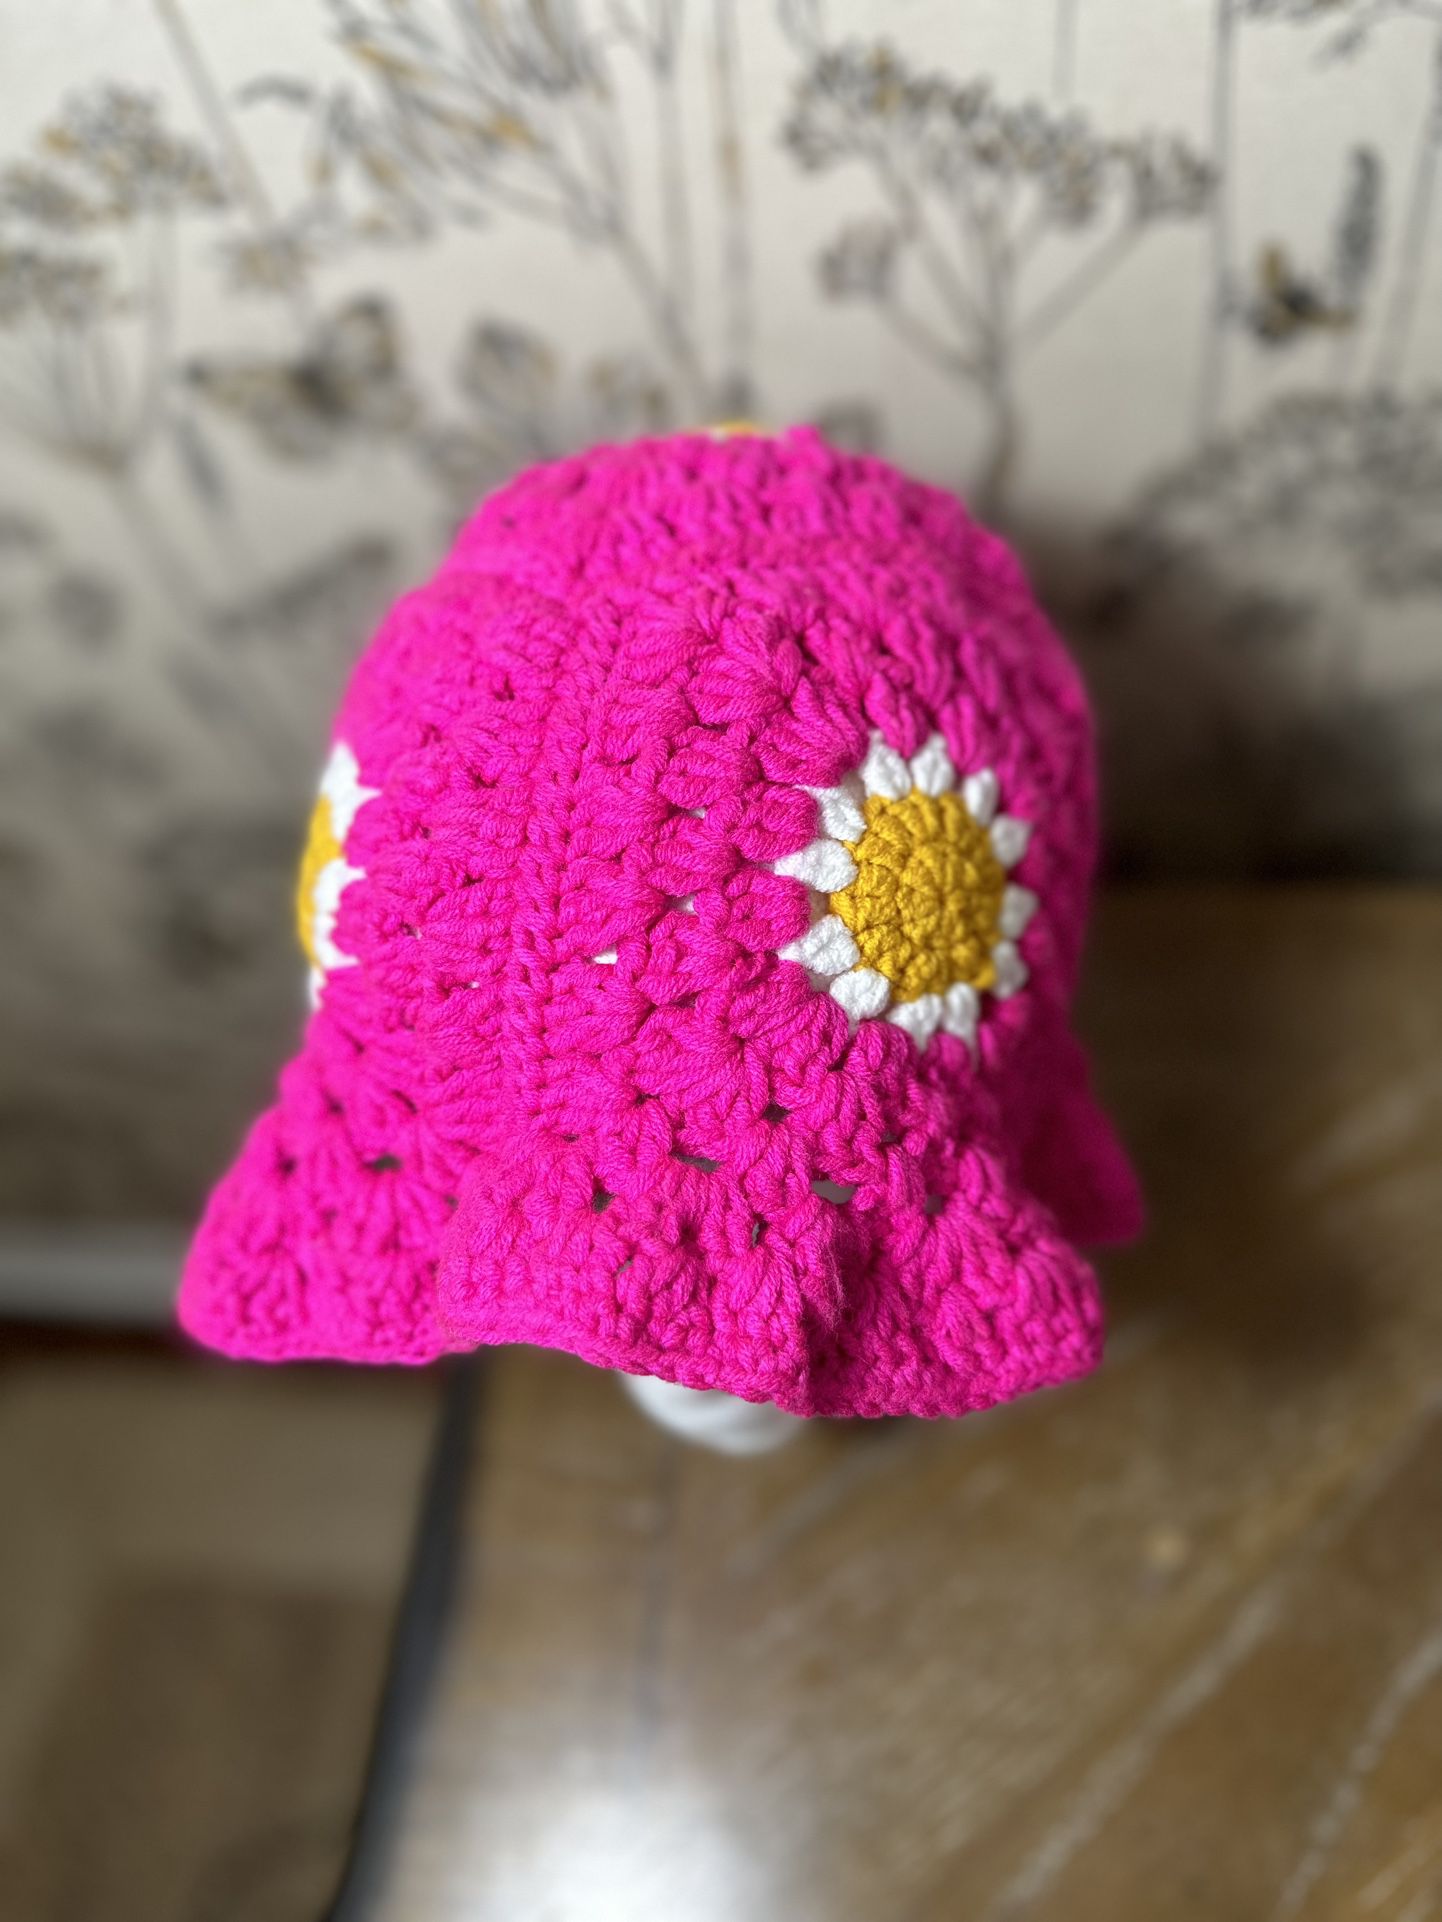 Shein Colorful Knitted Crochet Fisherman Hat